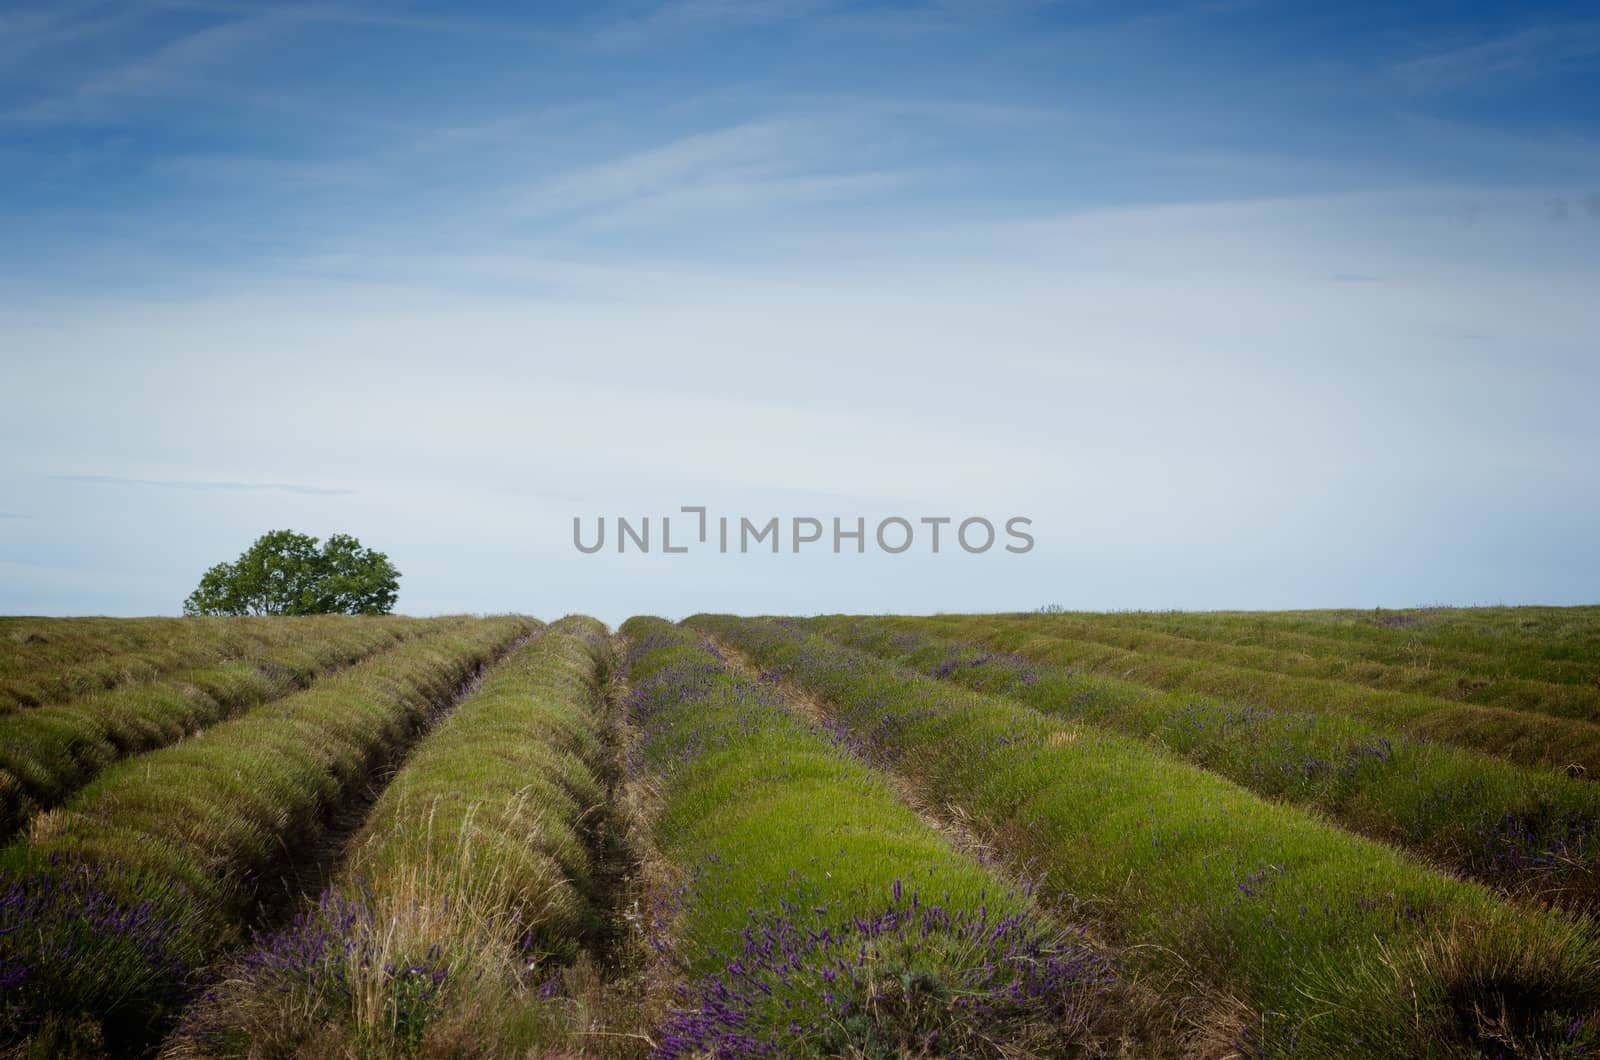 Straight rows of lavender plants in a field after harvest.